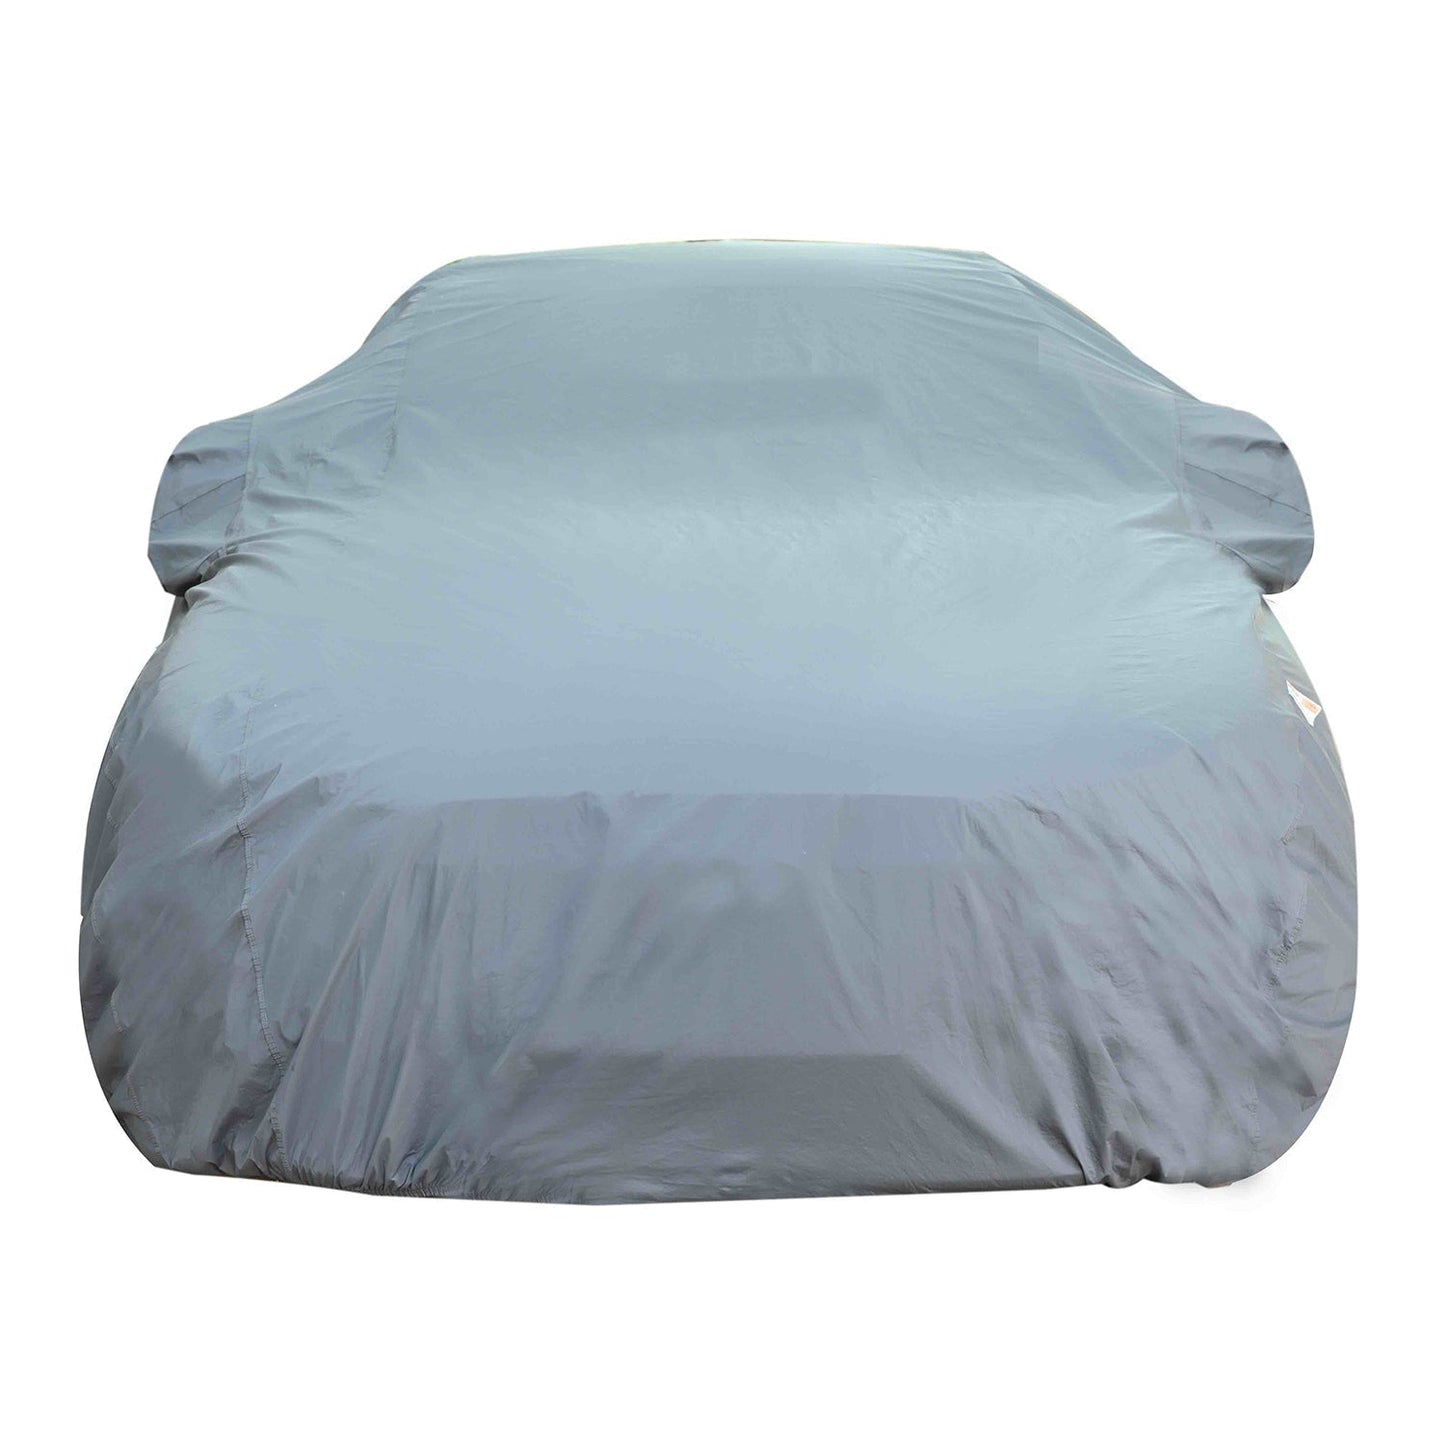 Oshotto Dark Grey 100% Anti Reflective, dustproof and Water Proof Car Body Cover with Mirror Pockets For Volvo S90